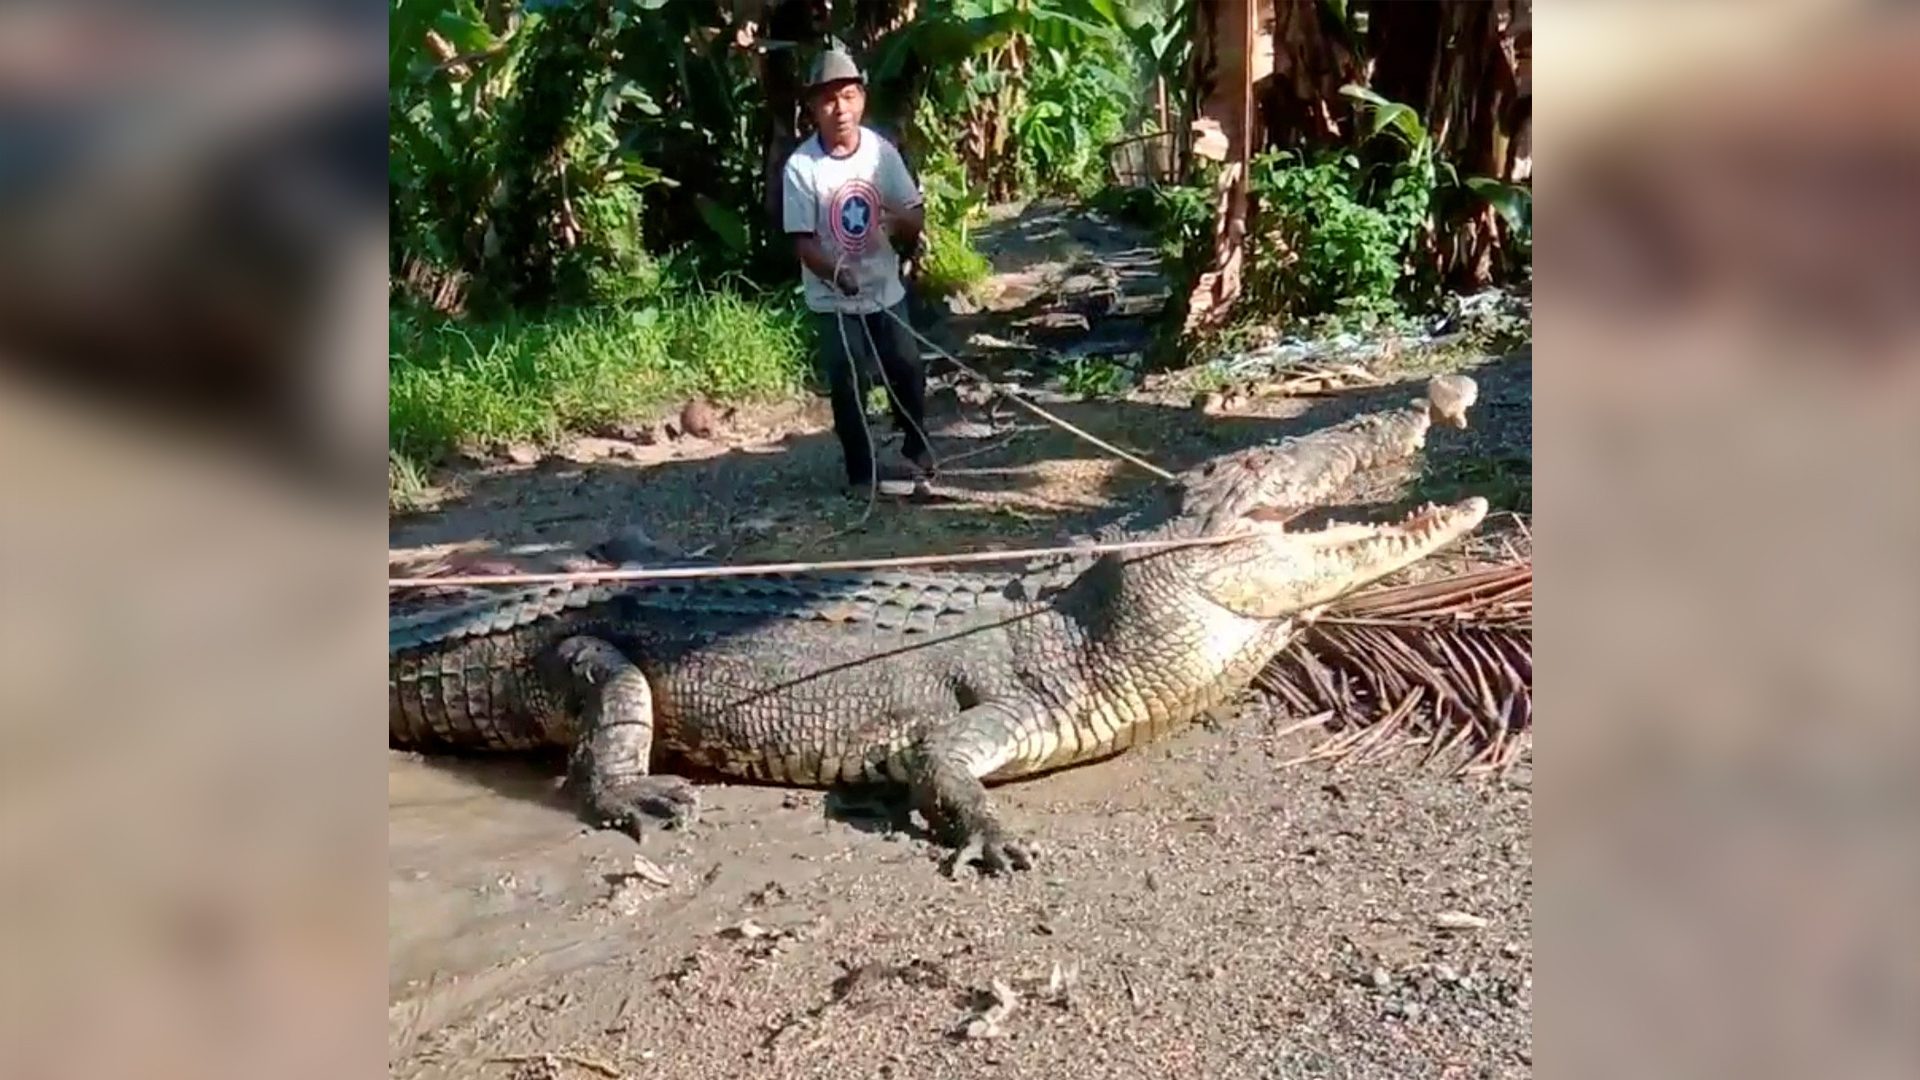 Villagers cheer Indonesian for capturing 14-foot crocodile using only a rope